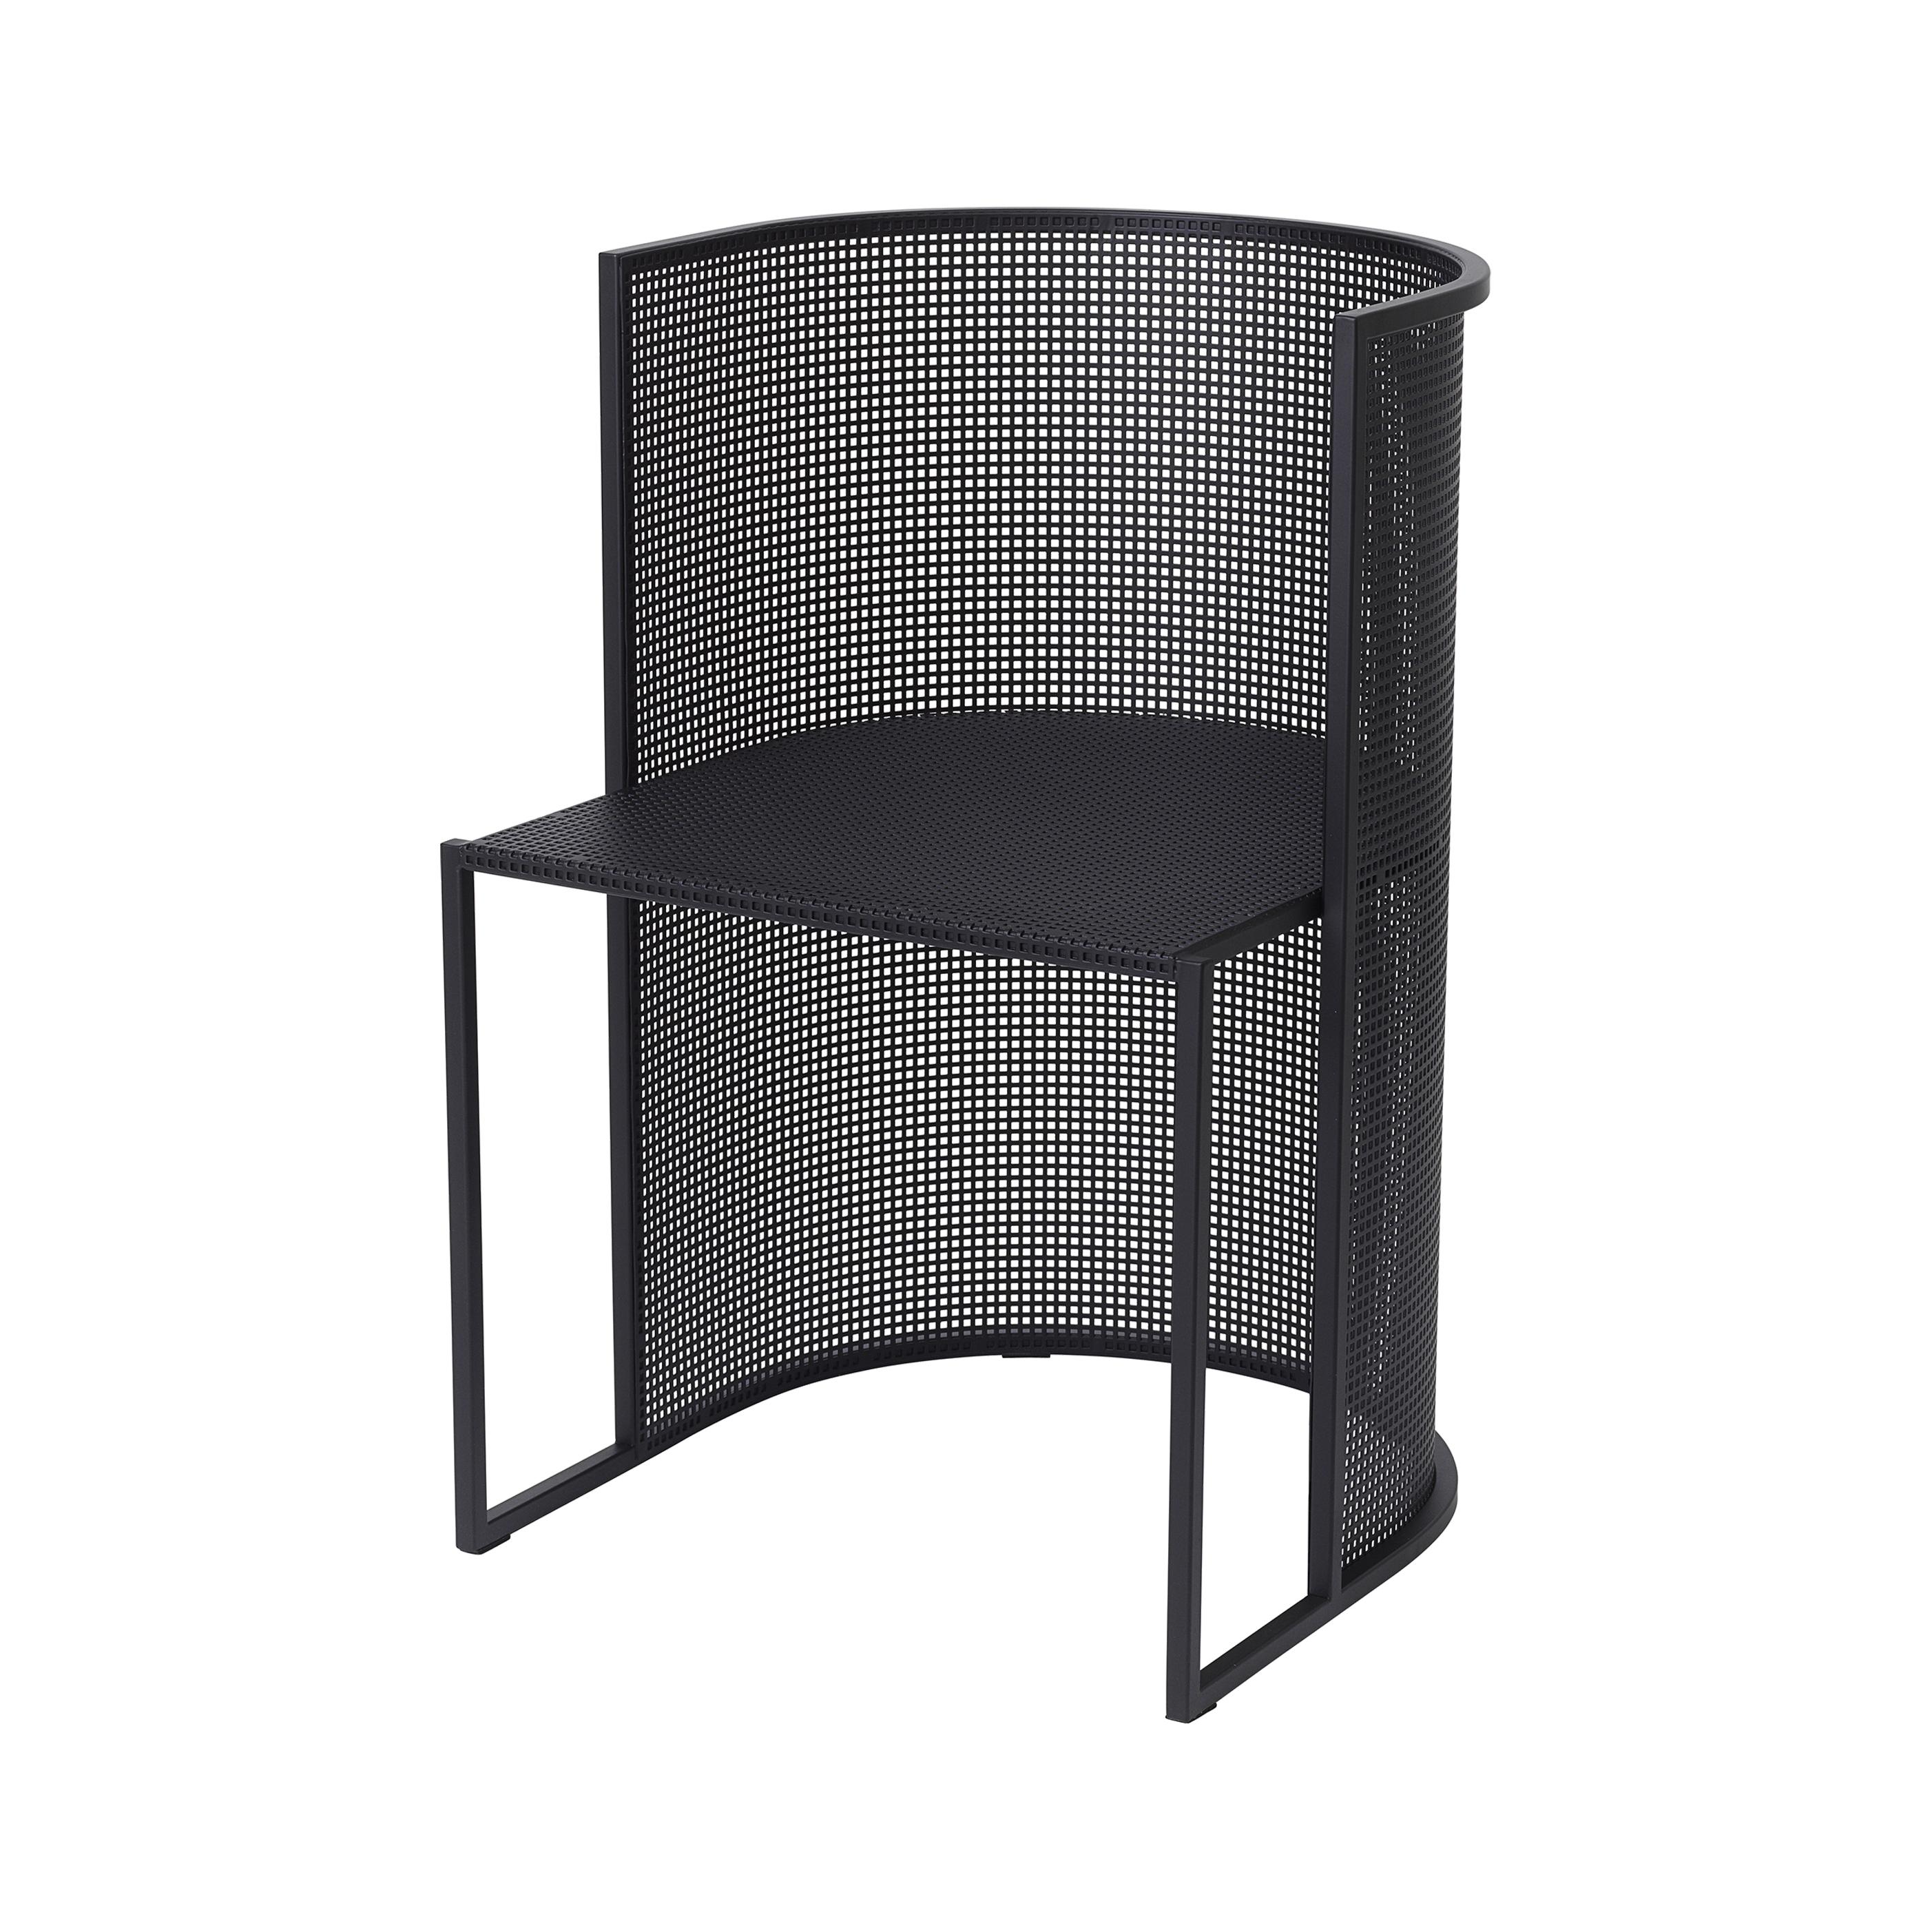 Steel Bahaus dining chair by Kristina Dam Studio
Materials: Black outdoor powder-coated steel
Dimensions: 77 x 53 x 51 cm

Dimensions cannot be customized.

*Safe to use outdoor.

Kristina Dam graduated from The Royal Danish School of Fine Arts,